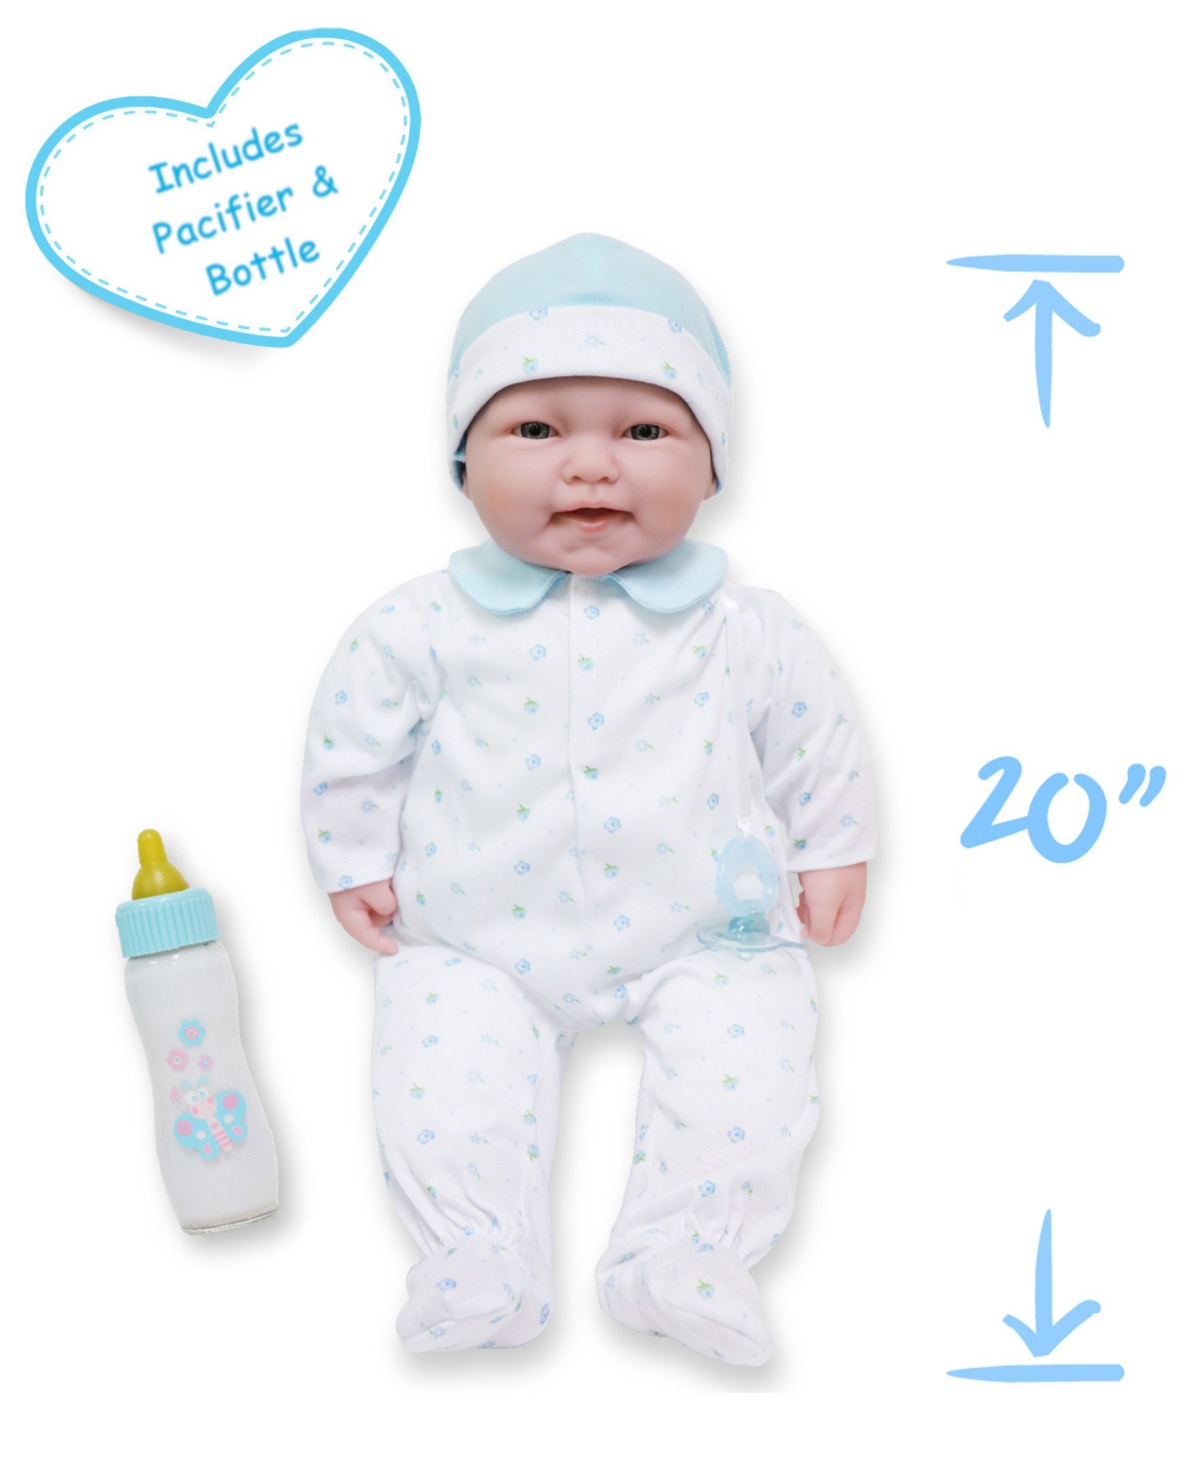 Shop Jc Toys La Baby Caucasian 20" Soft Body Baby Doll Blue Outfit